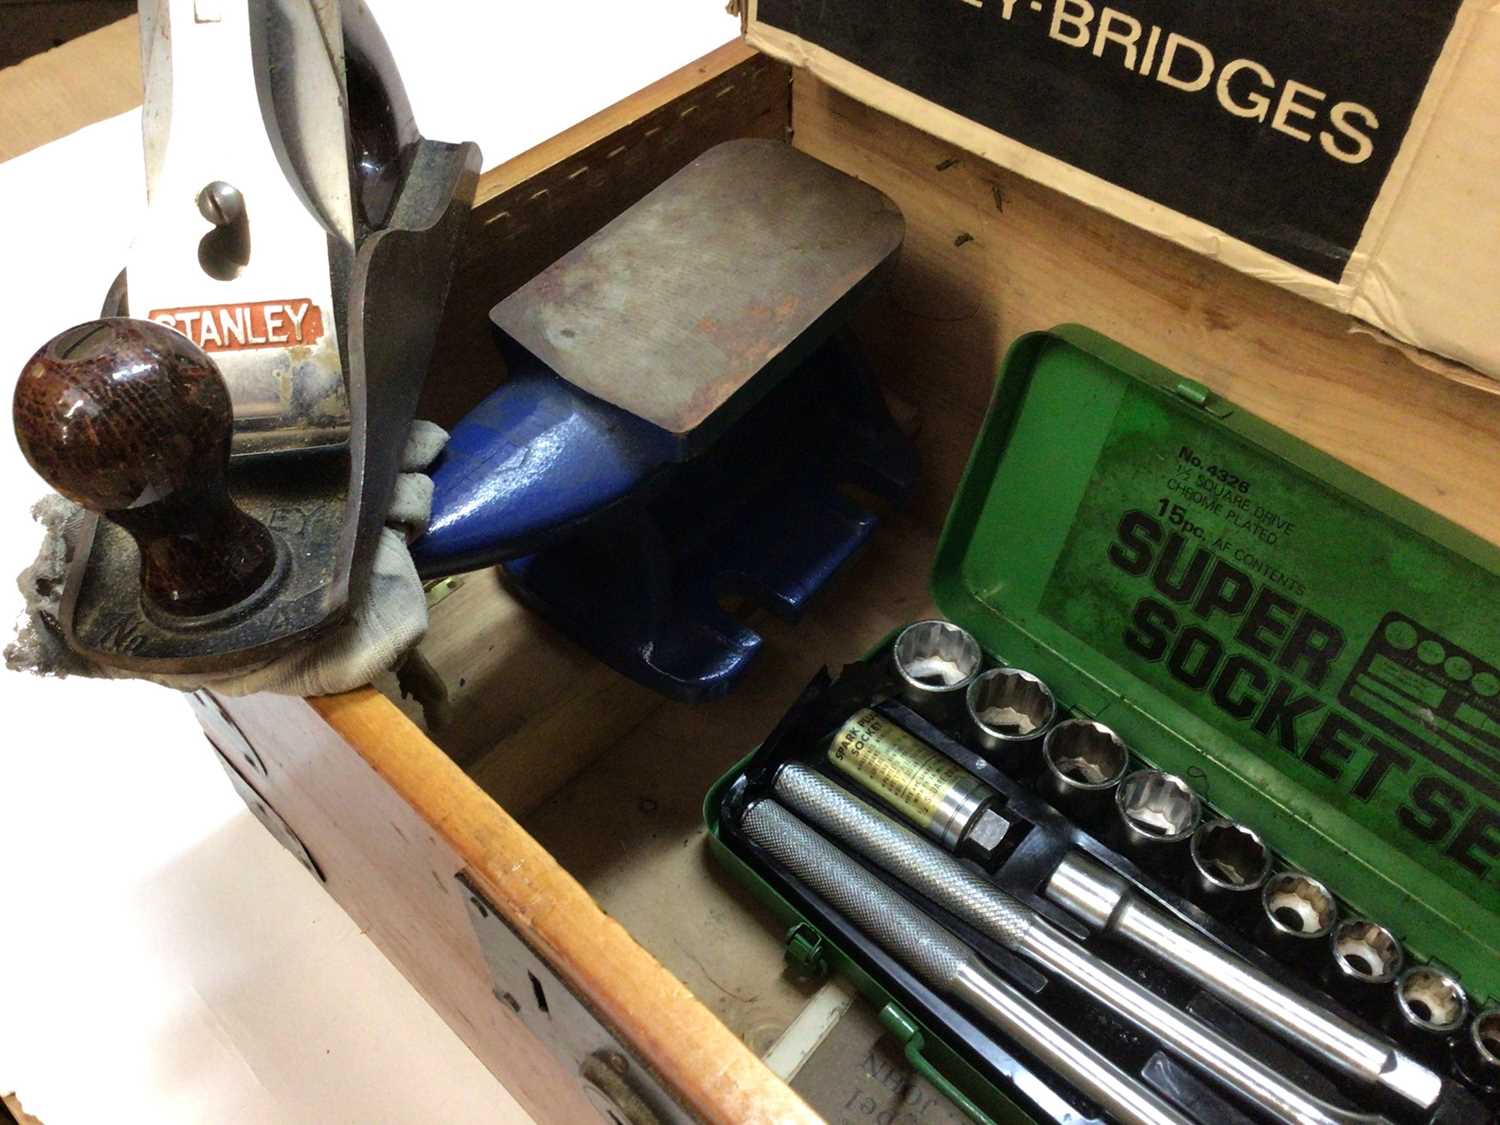 A Stanley plane, a Record plane, a Stanley Bridges sander, a socket set, etc, in a wooden tool box - Image 4 of 5